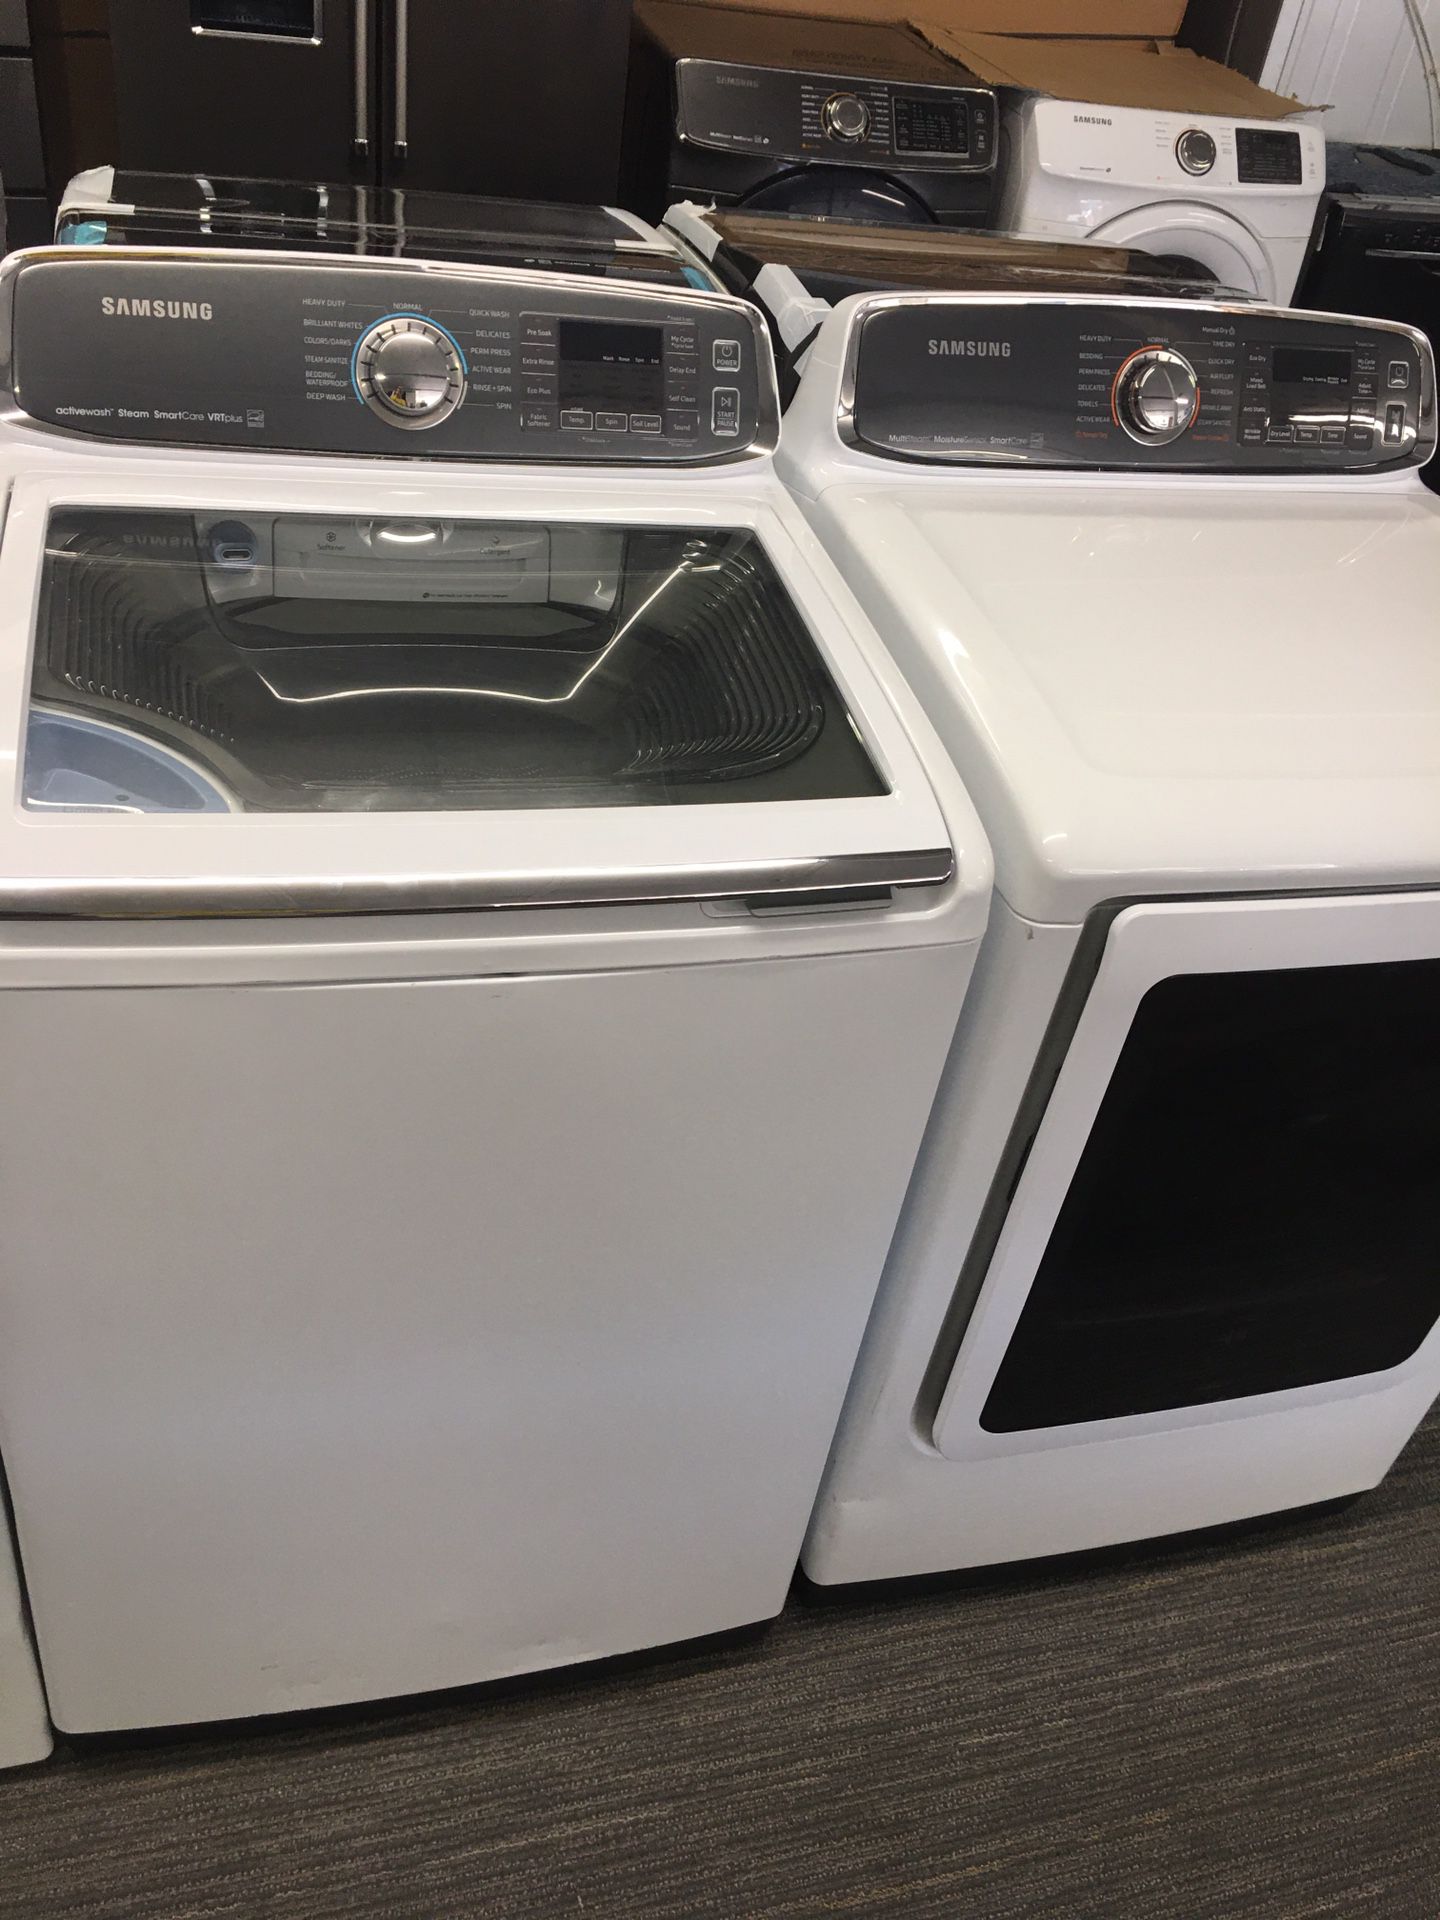 Samsung set Washer And Dye King Size Capacity With Warranty No Credit Check Just $49 Down payment Cash price $1,500